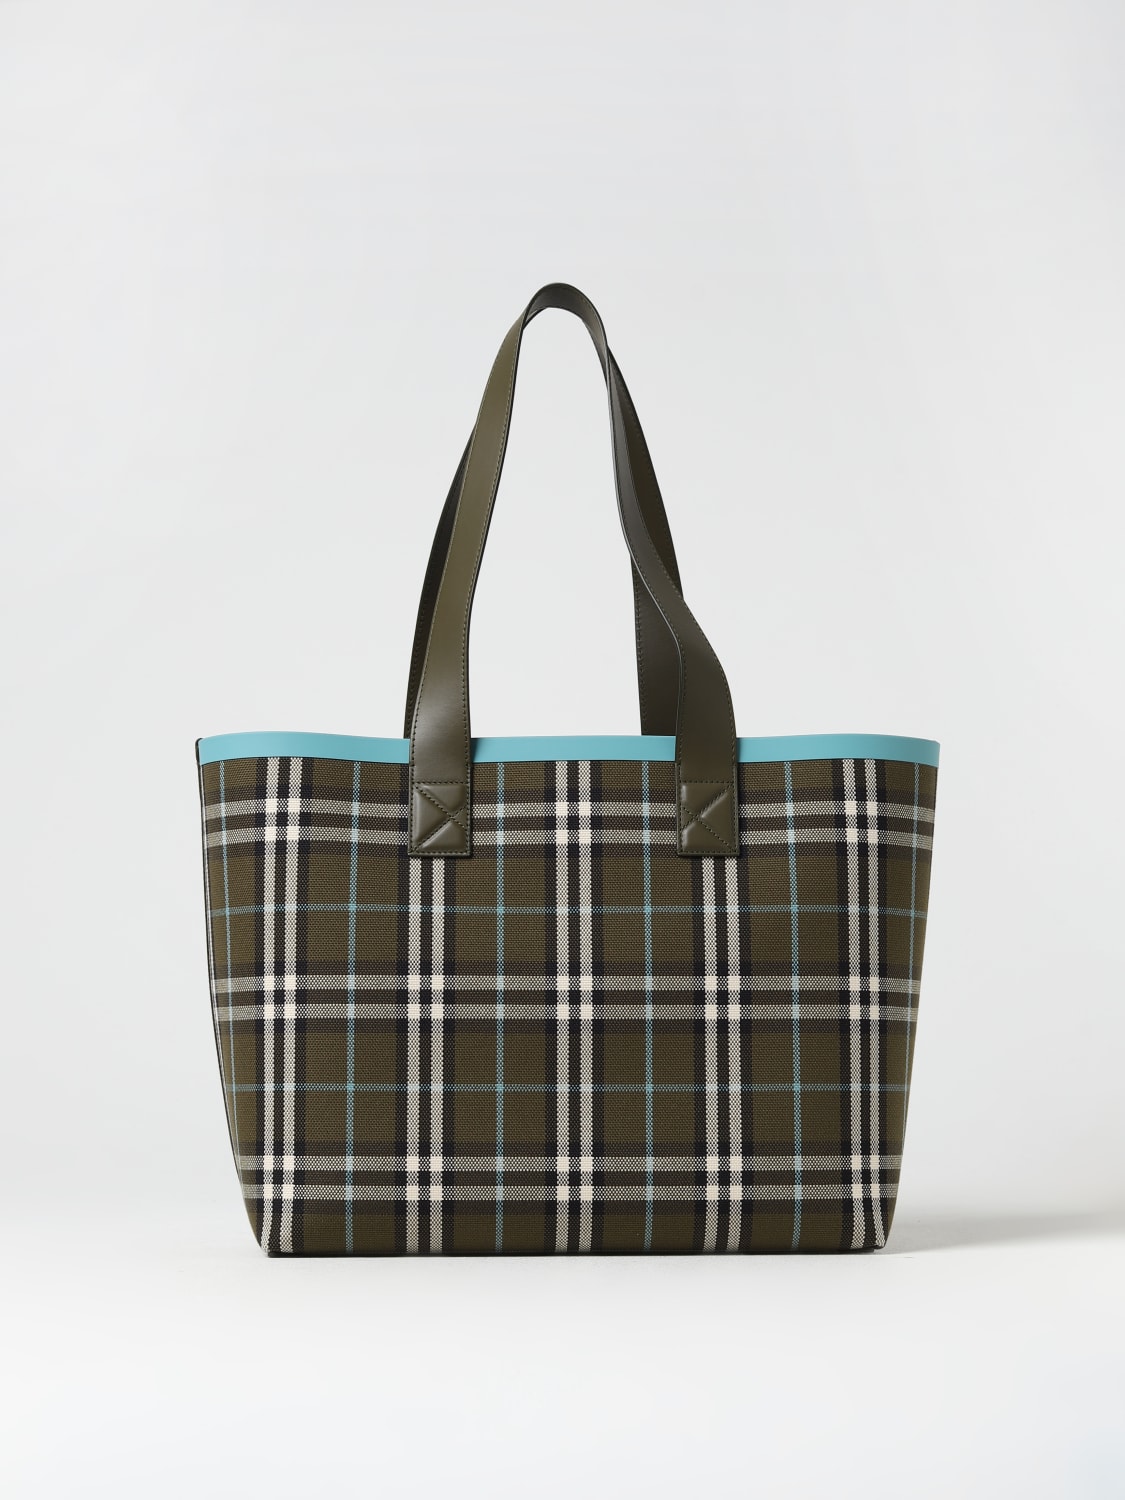 London Check Canvas Tote Bag in Black - Burberry